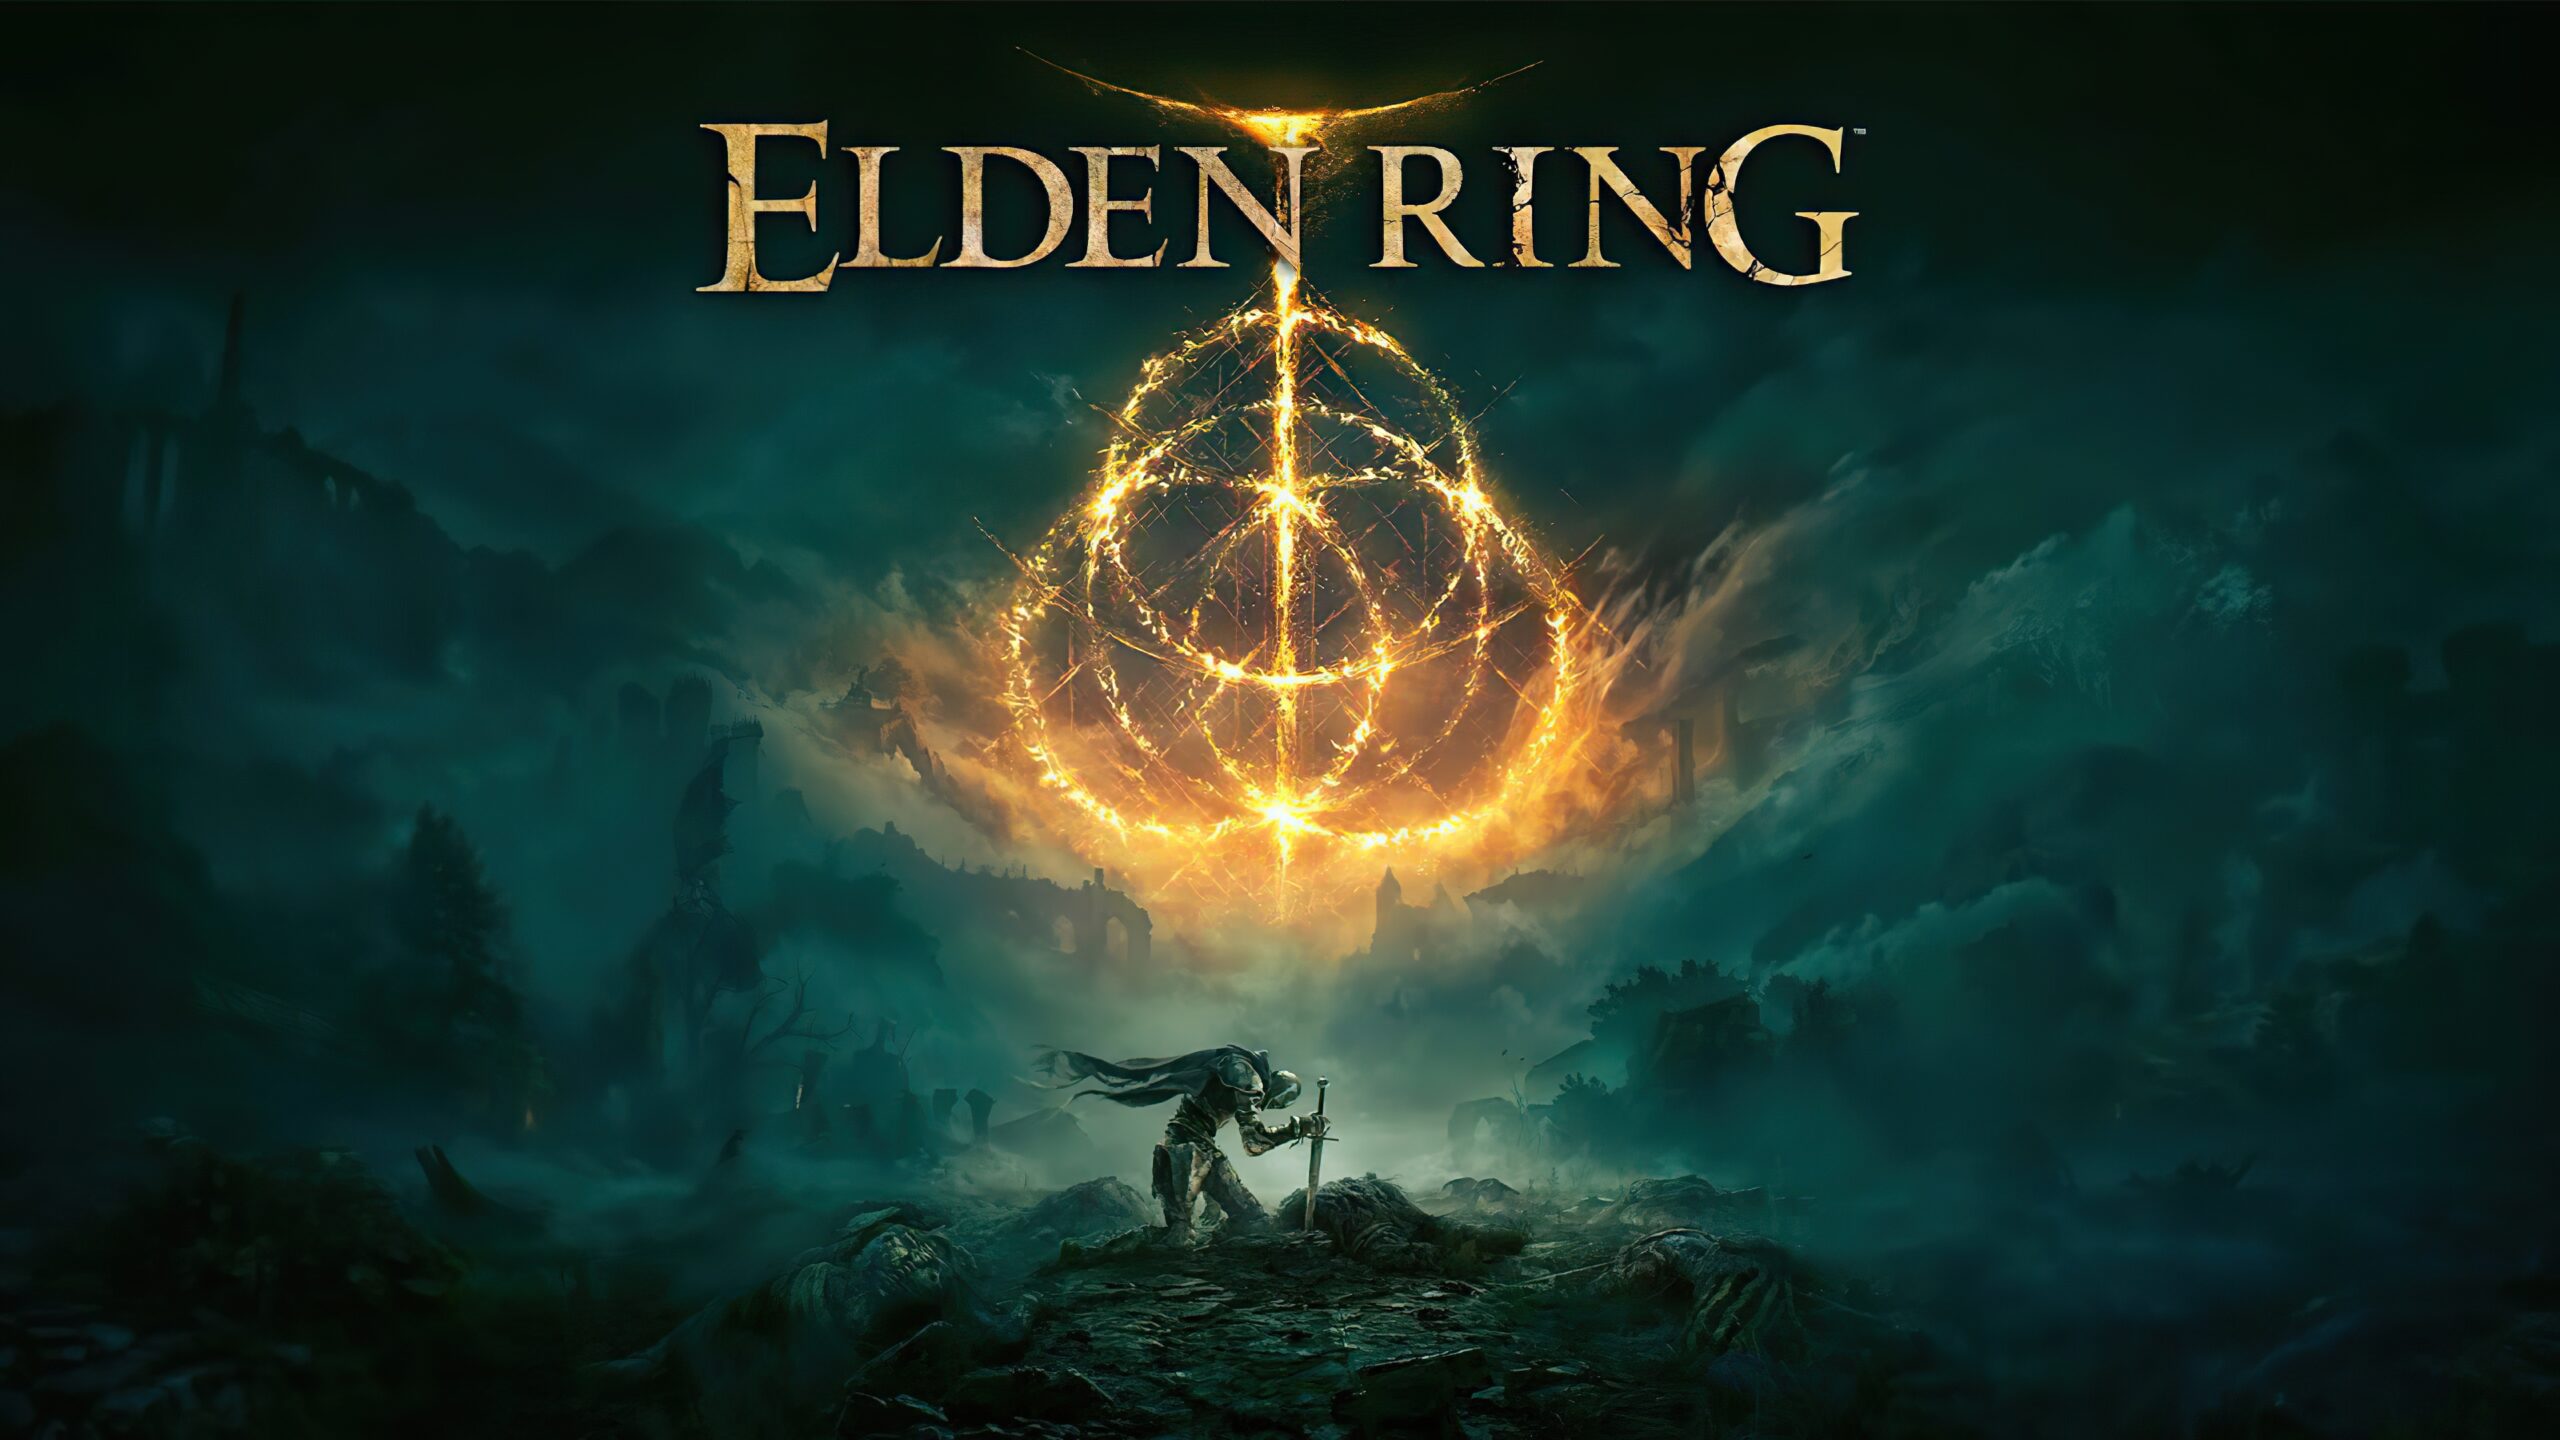 Like Baldur's Gate 3, Elden Ring Too Can Be Categorized As An Indie AAA Release